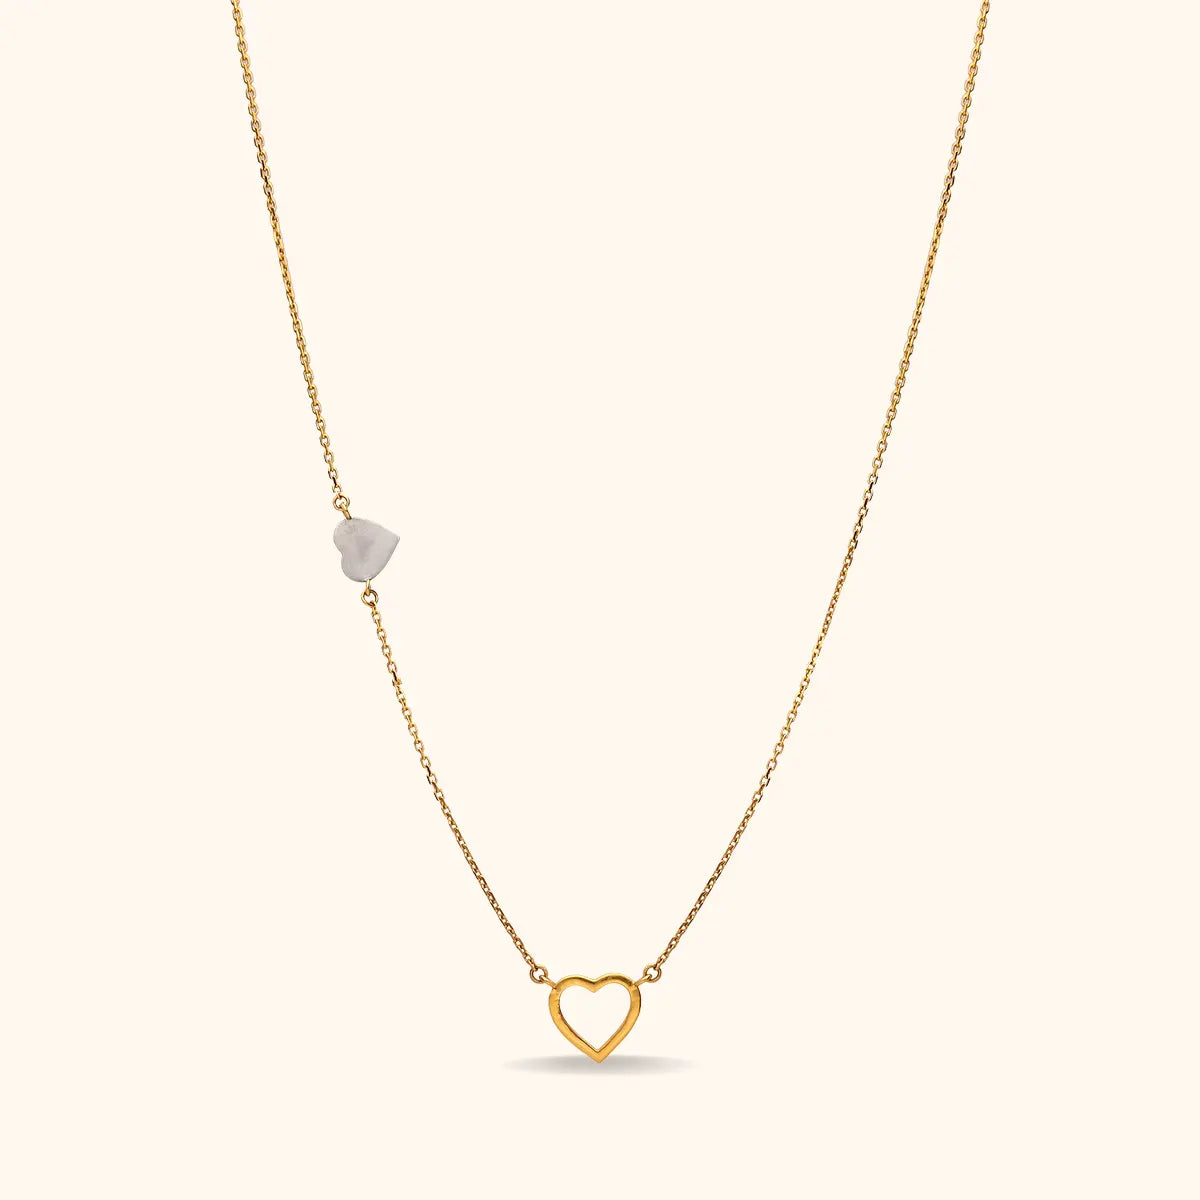 Dual Heartbeat - Gold Necklace